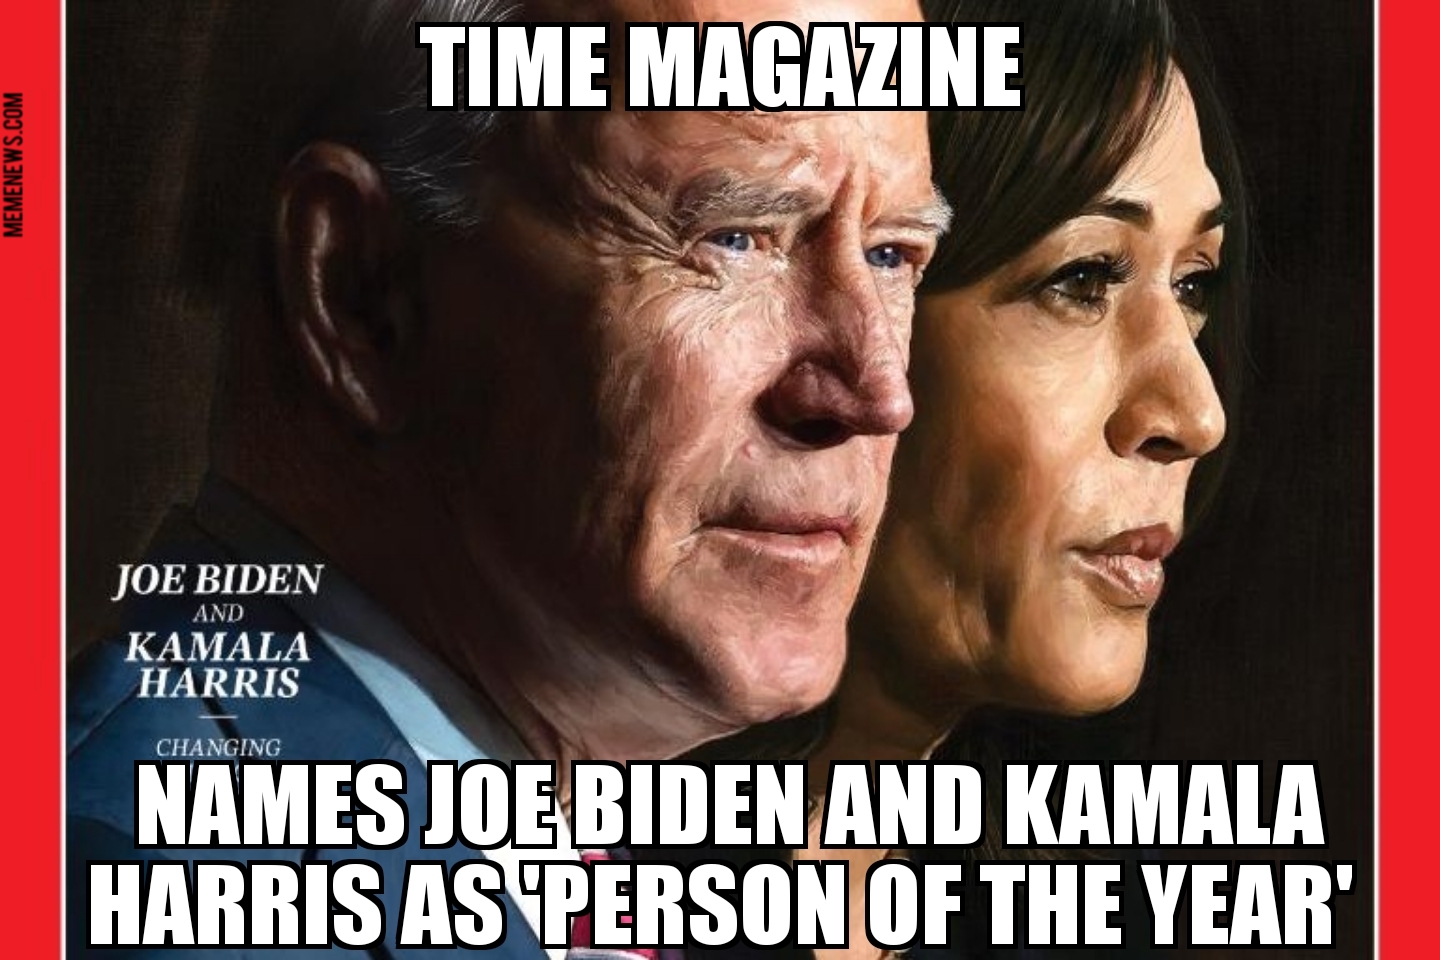 Biden, Harris win Time ‘Person of The Year’